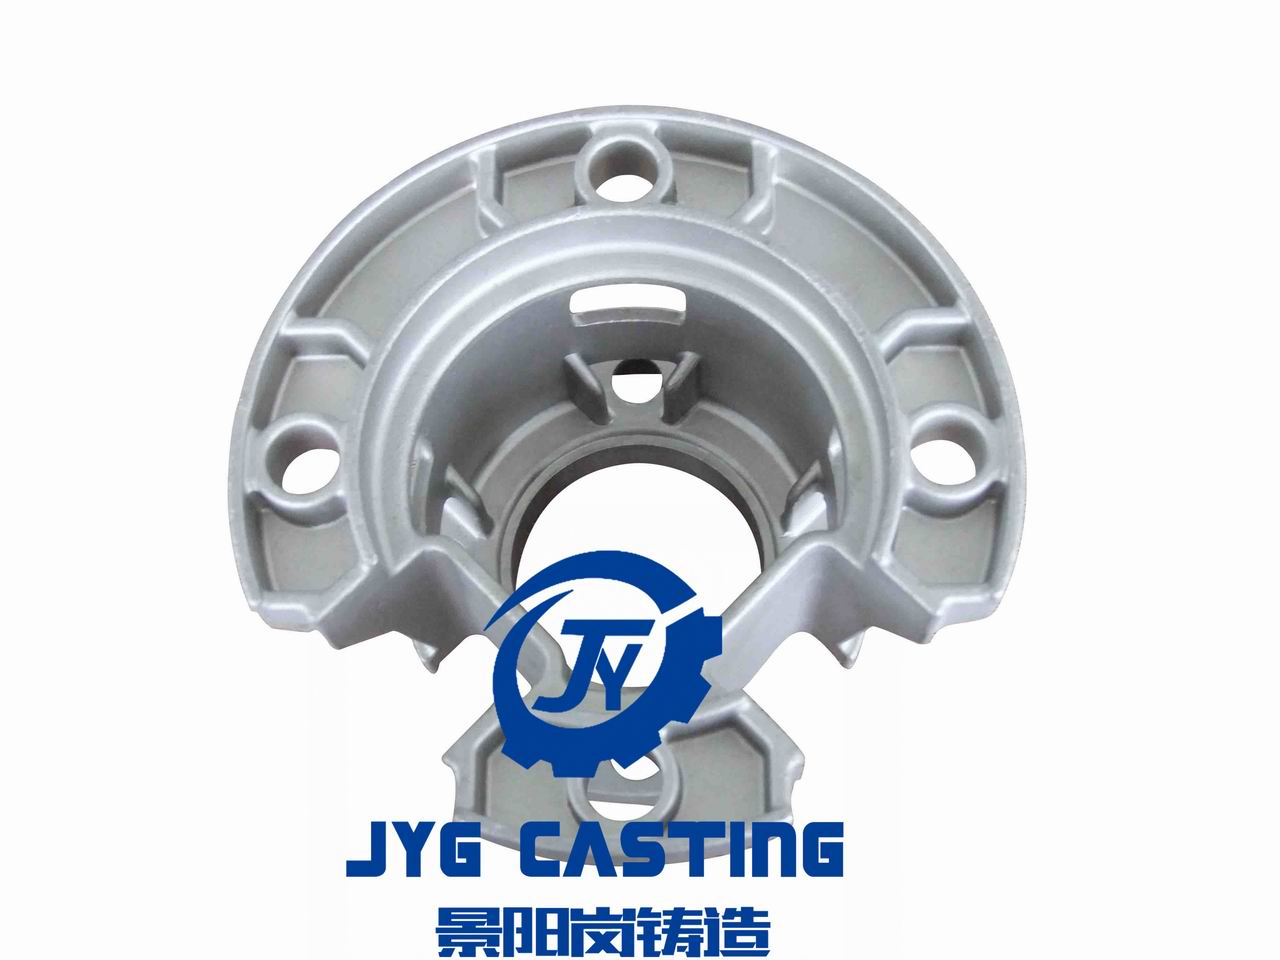 JYG Casting Customizes Quality Investment Casting Auto Parts